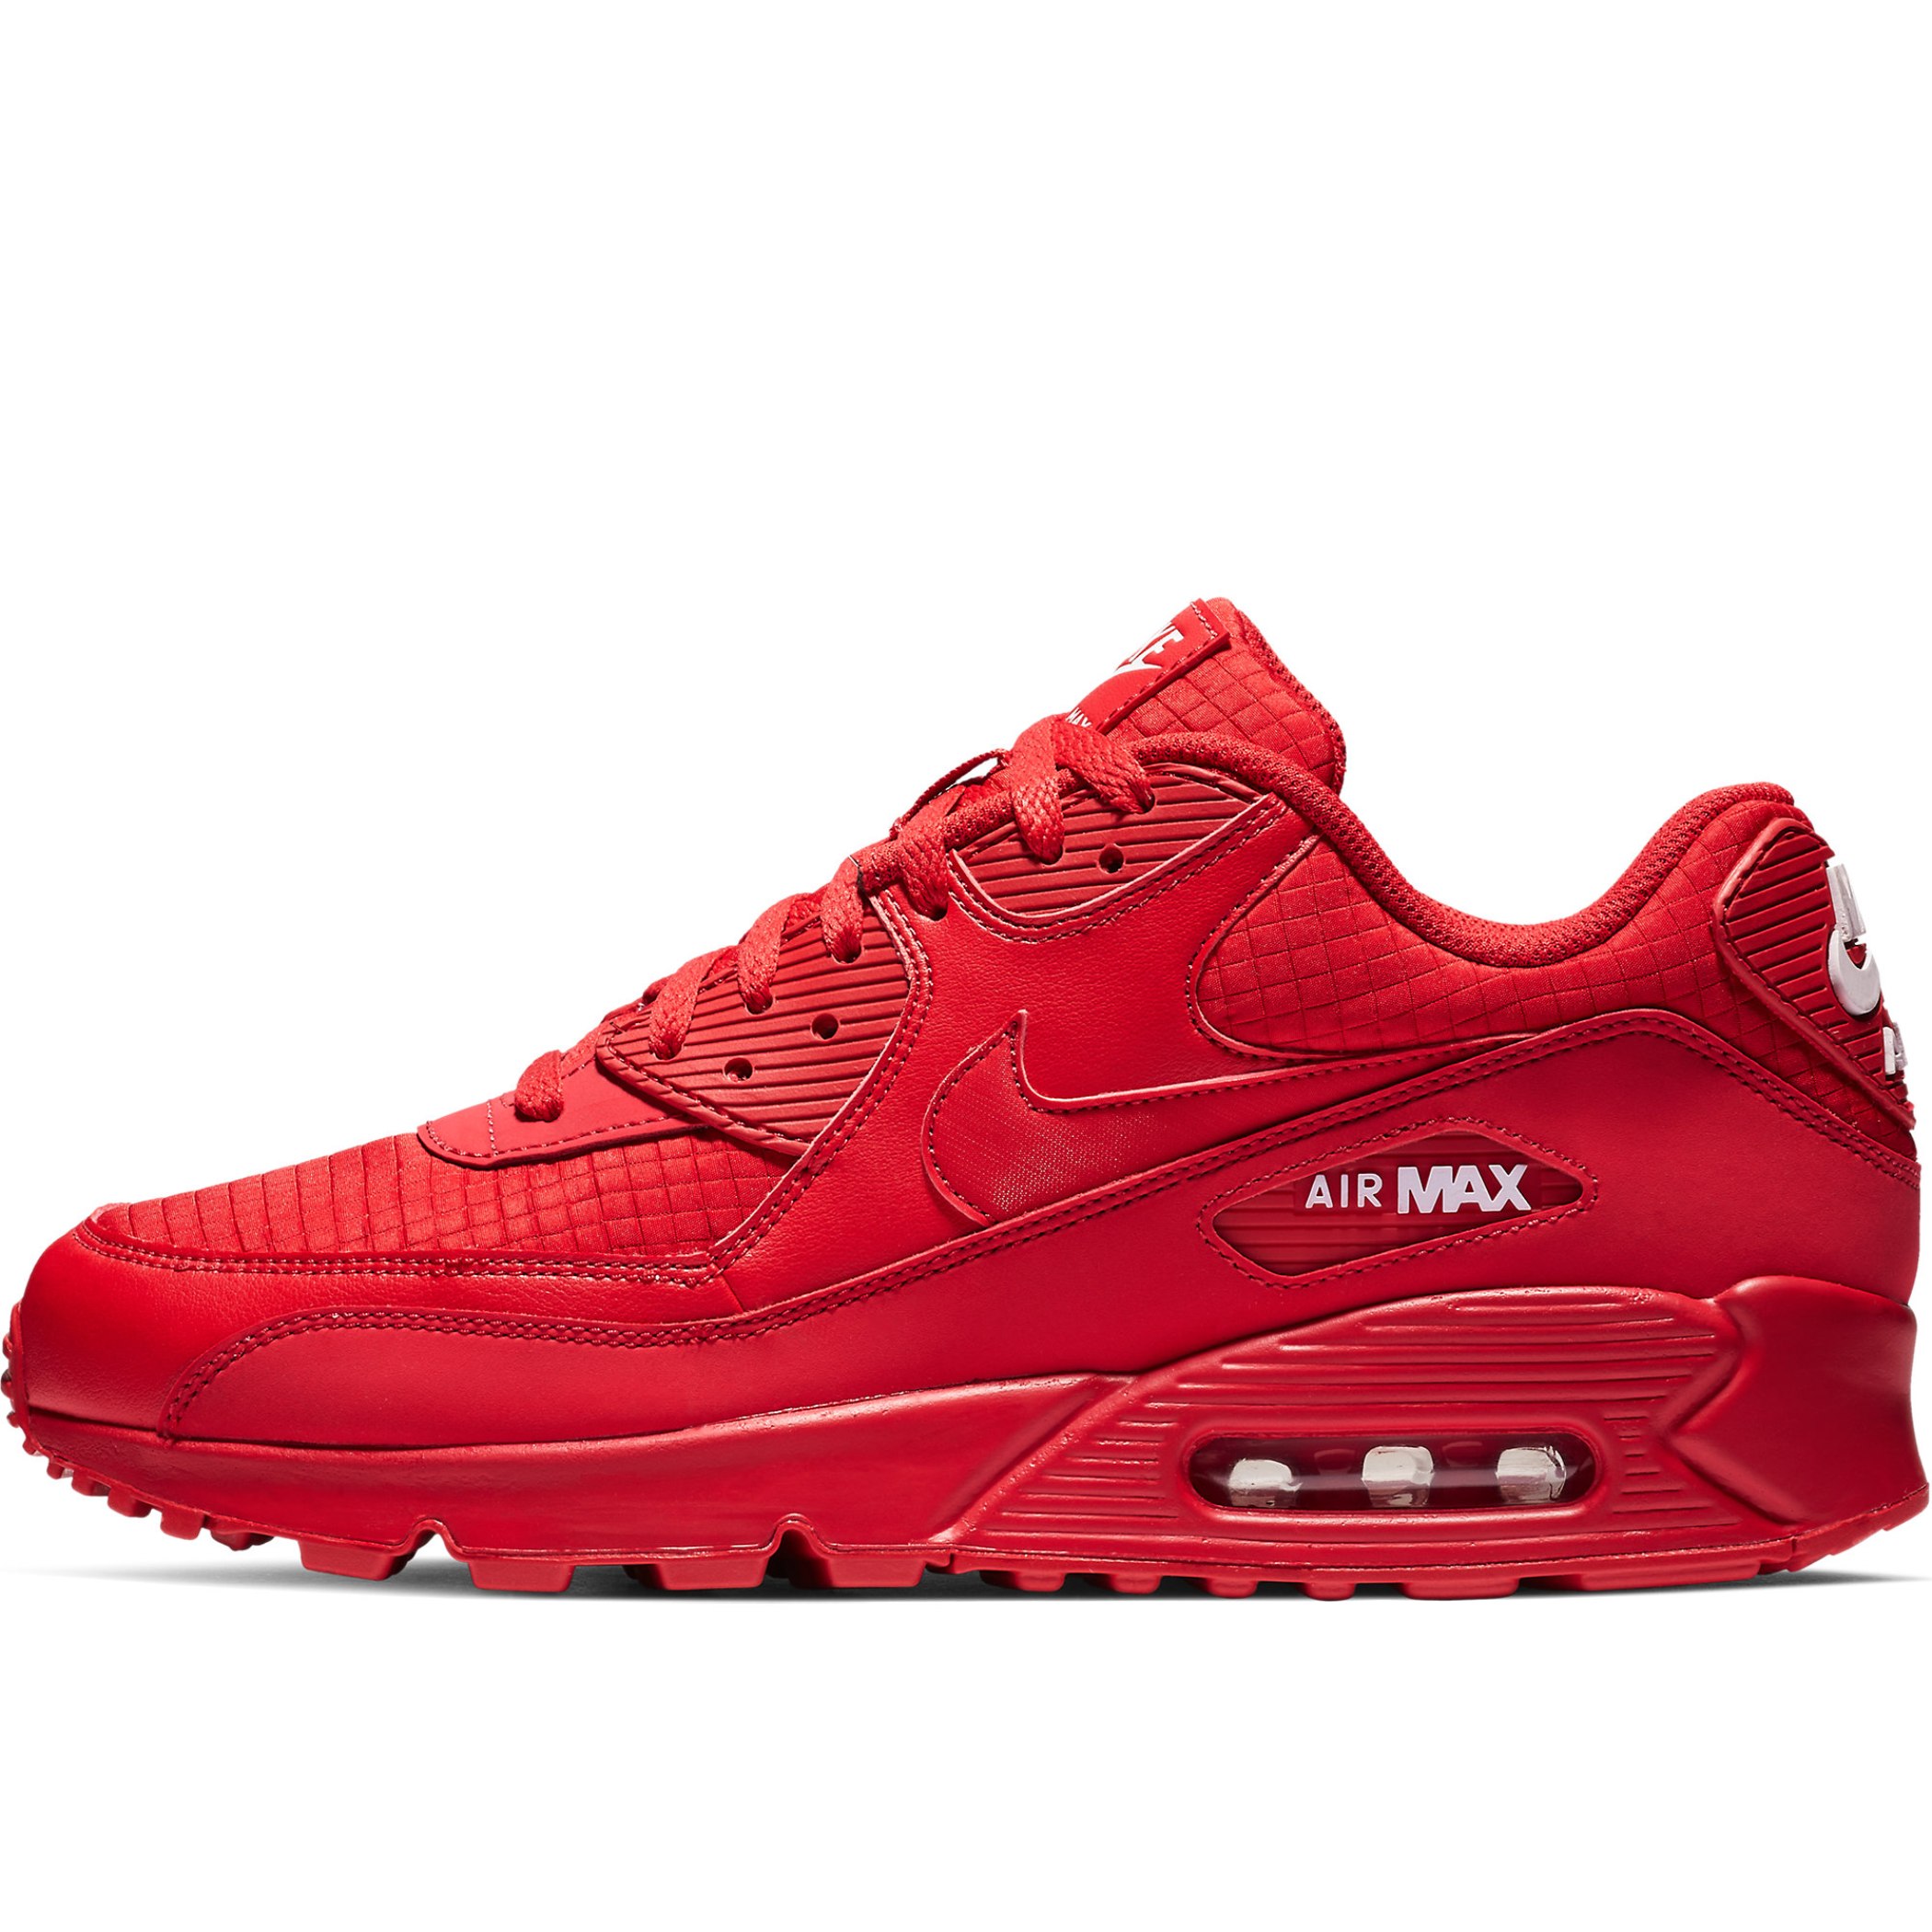 red and white airmax 90